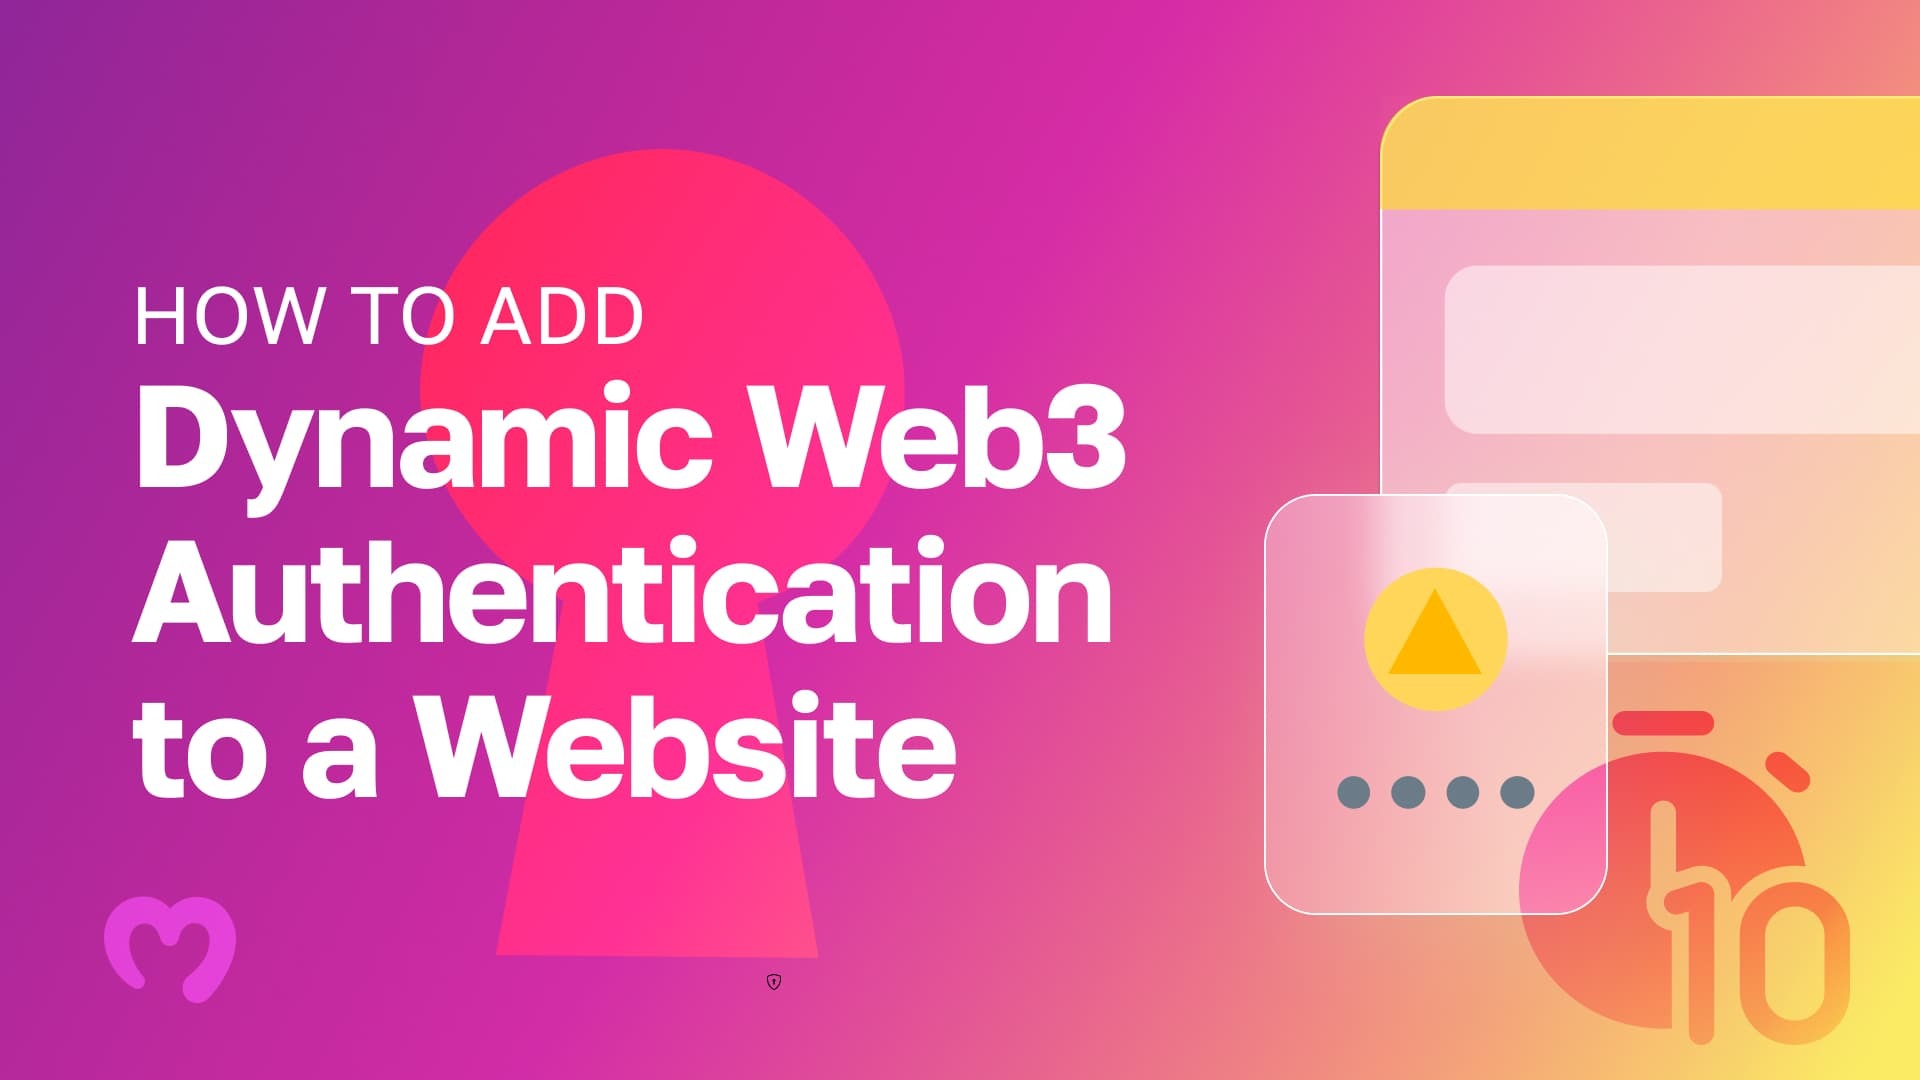 Keyhole with a overlapping text stating "How to add dynamic Web3 authentication to a website".